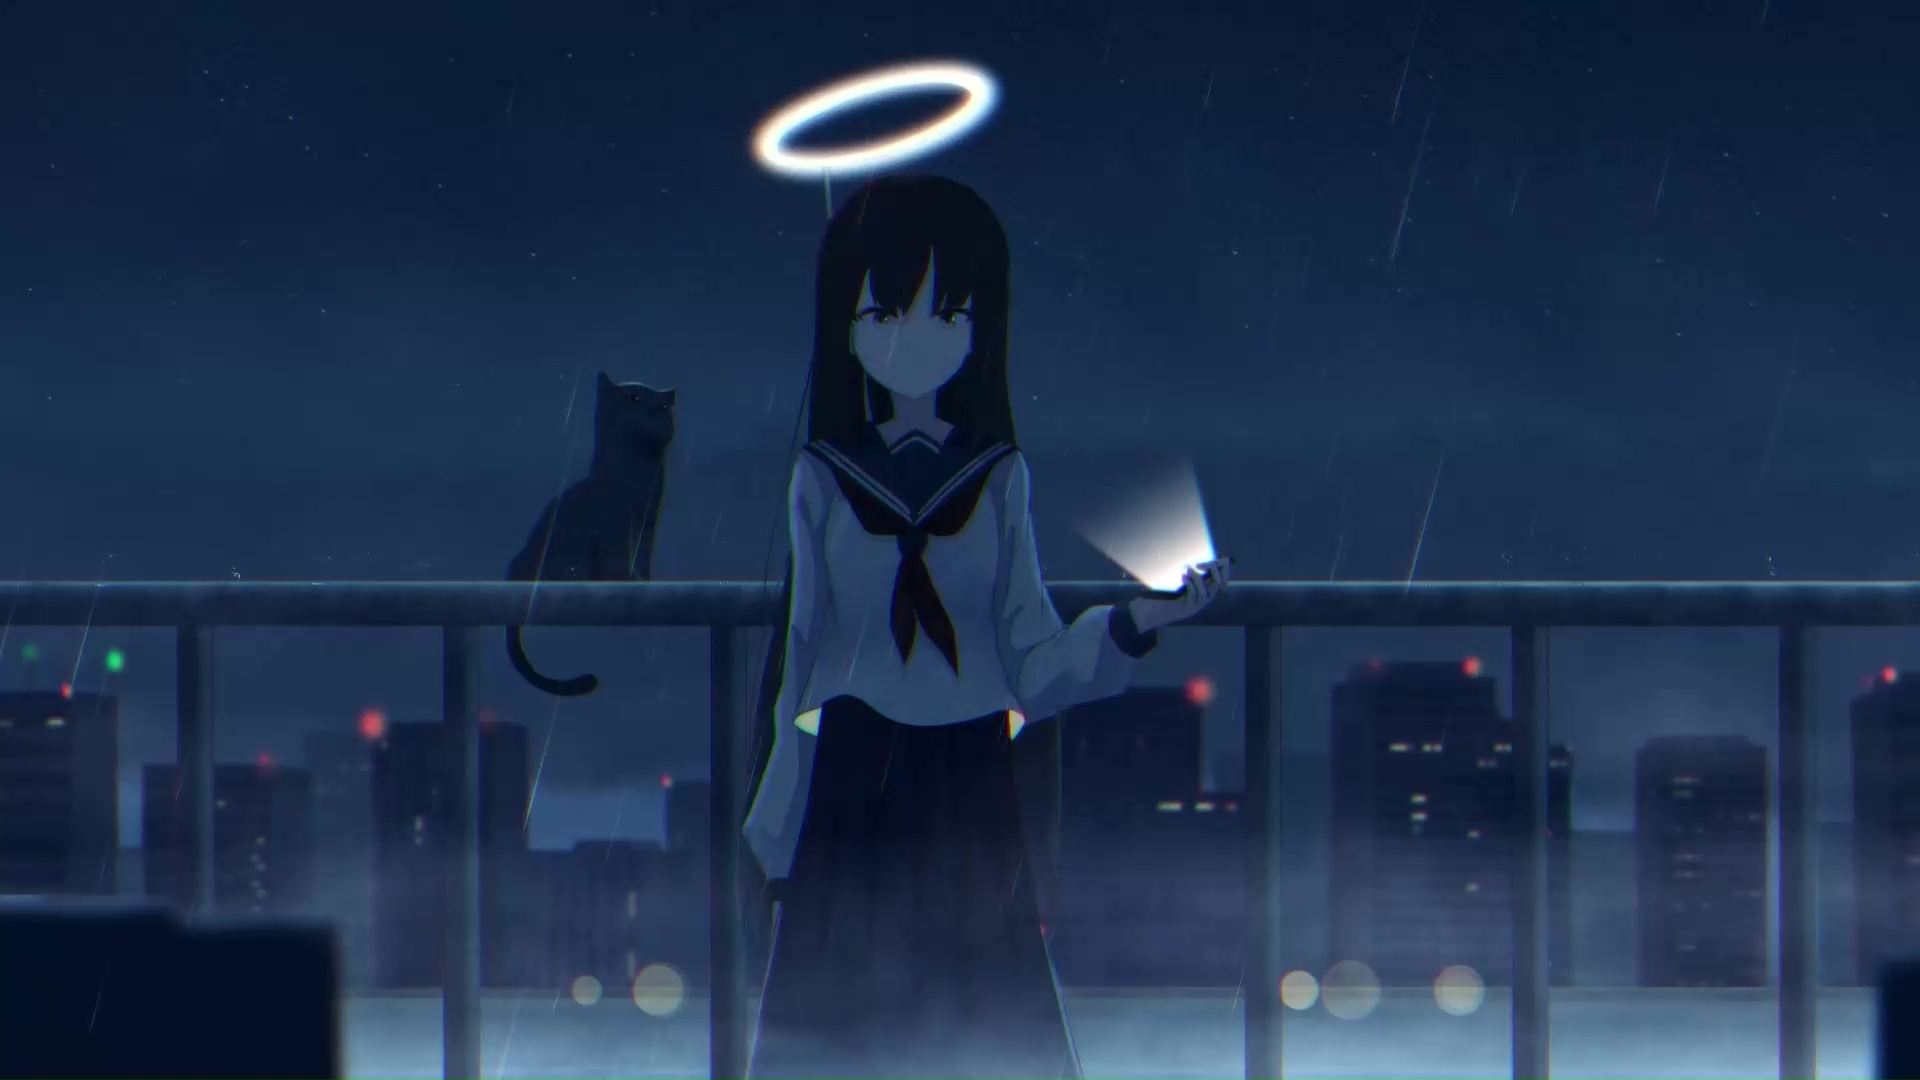 Anime Live Wallpaper with rain and particles by Nathan477 on DeviantArt